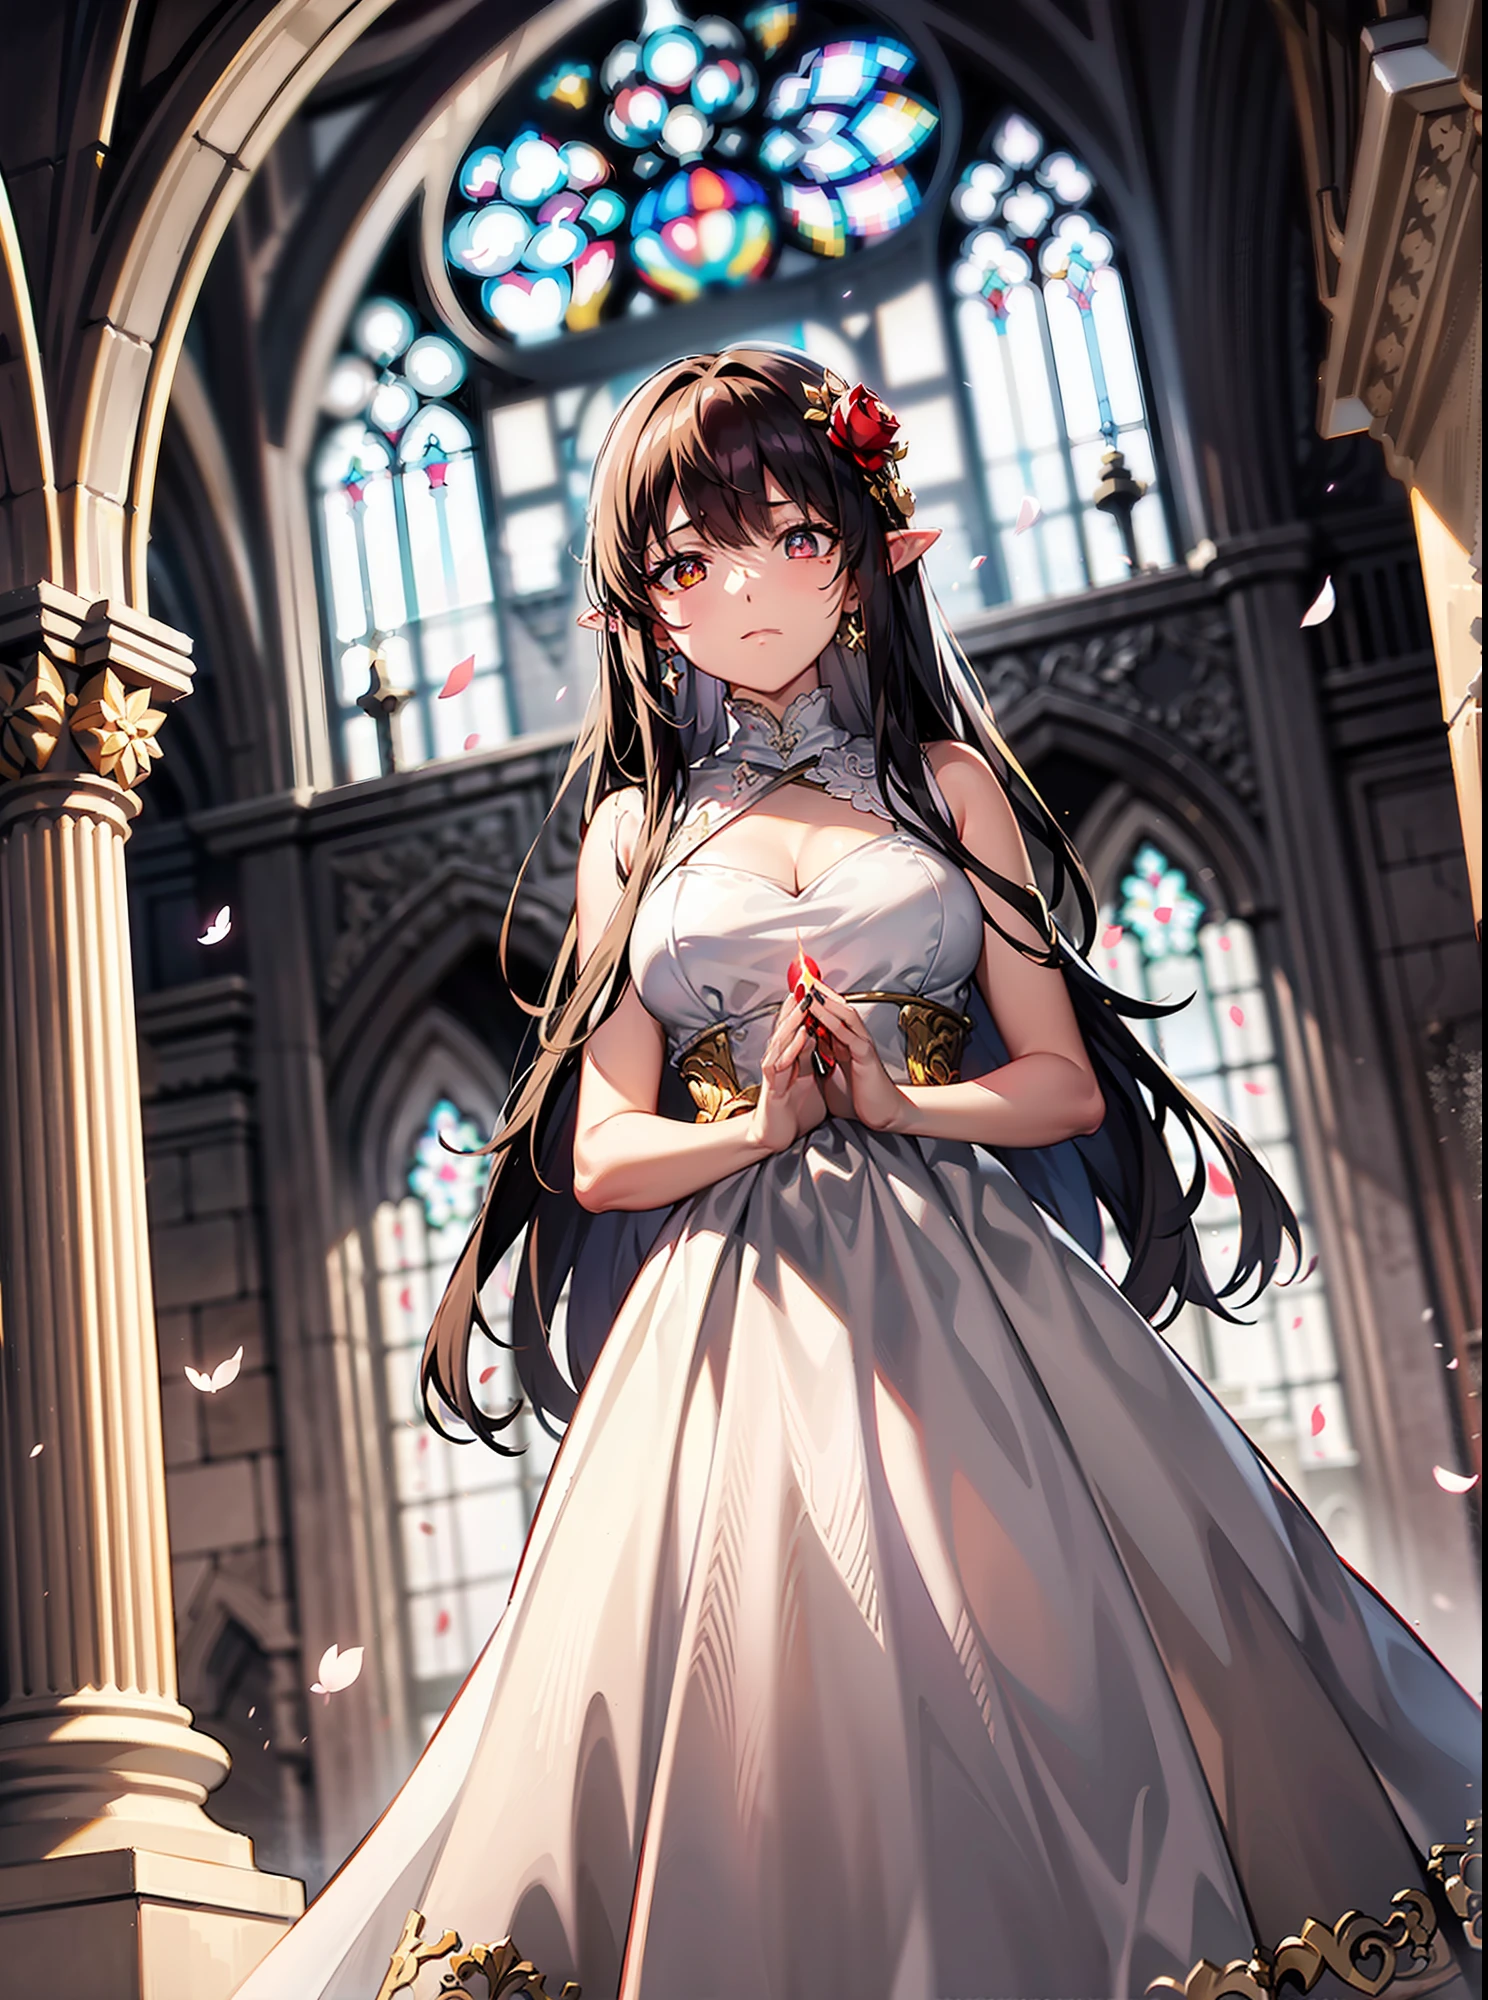 A young girl stands on the ground，（Dark purple dress long dresedieval lavish dress，Prom Dresses、Fluffy dress dress、pleatedskirt、Lace lace），Silver or dark gold lace，bound waist），（Bright interior of the church、Pure white church、Pure white walls，Holy sense of picture），（At the bottom of the screen, Ivory white ground，Reflection of the ground reflection，Carved stone slabs，Classical carved stone pillars，blurryforeground，Falling crimson petals and glowing red butterflies），（Reduced saturation，warmtones，Silvery-white tones，Bright ivory white church background，There is a hierarchical background，White and gold palace，Light background，Glorious background，Huge golden chandelier、Candle chandeliers，Huge stained glass windows in the church，Ivory white stone pillars，Exquisite ornaments），Rendering effects，depth of ﬁeld，（（cabelos preto e longos），Striped hair, Red infracing, Long sideburns, crossed bangs, Hairline, Dark red flower hair ornament, Diamond-shaped pupils, Colored pupil color，Moles under eyes, Red crystal earrings, Pointy ears, （（blood in face、There is blood on the side of the mouth，wounds，Broken clothes，There is blood on the body）））, High detail, clair obscur, Ray tracing,tachi-e, Super detail, （（The light from the back window is backlighted，Center composition，The picture has a flake of rainbow-colored light，Divine sense of picture，Tyndall Light，Design images with a wide-angle lens effect，Hands across your waist、The left hand is wrapped around the waist，Empty eyes, Dilated pupils, half-closed eye, flower shaped pupils, Closed mouth, pain, Expressionless, turn pale，Full body photo，ultra-wide-angle，Face Shadow）），Masterpiece, 4K，